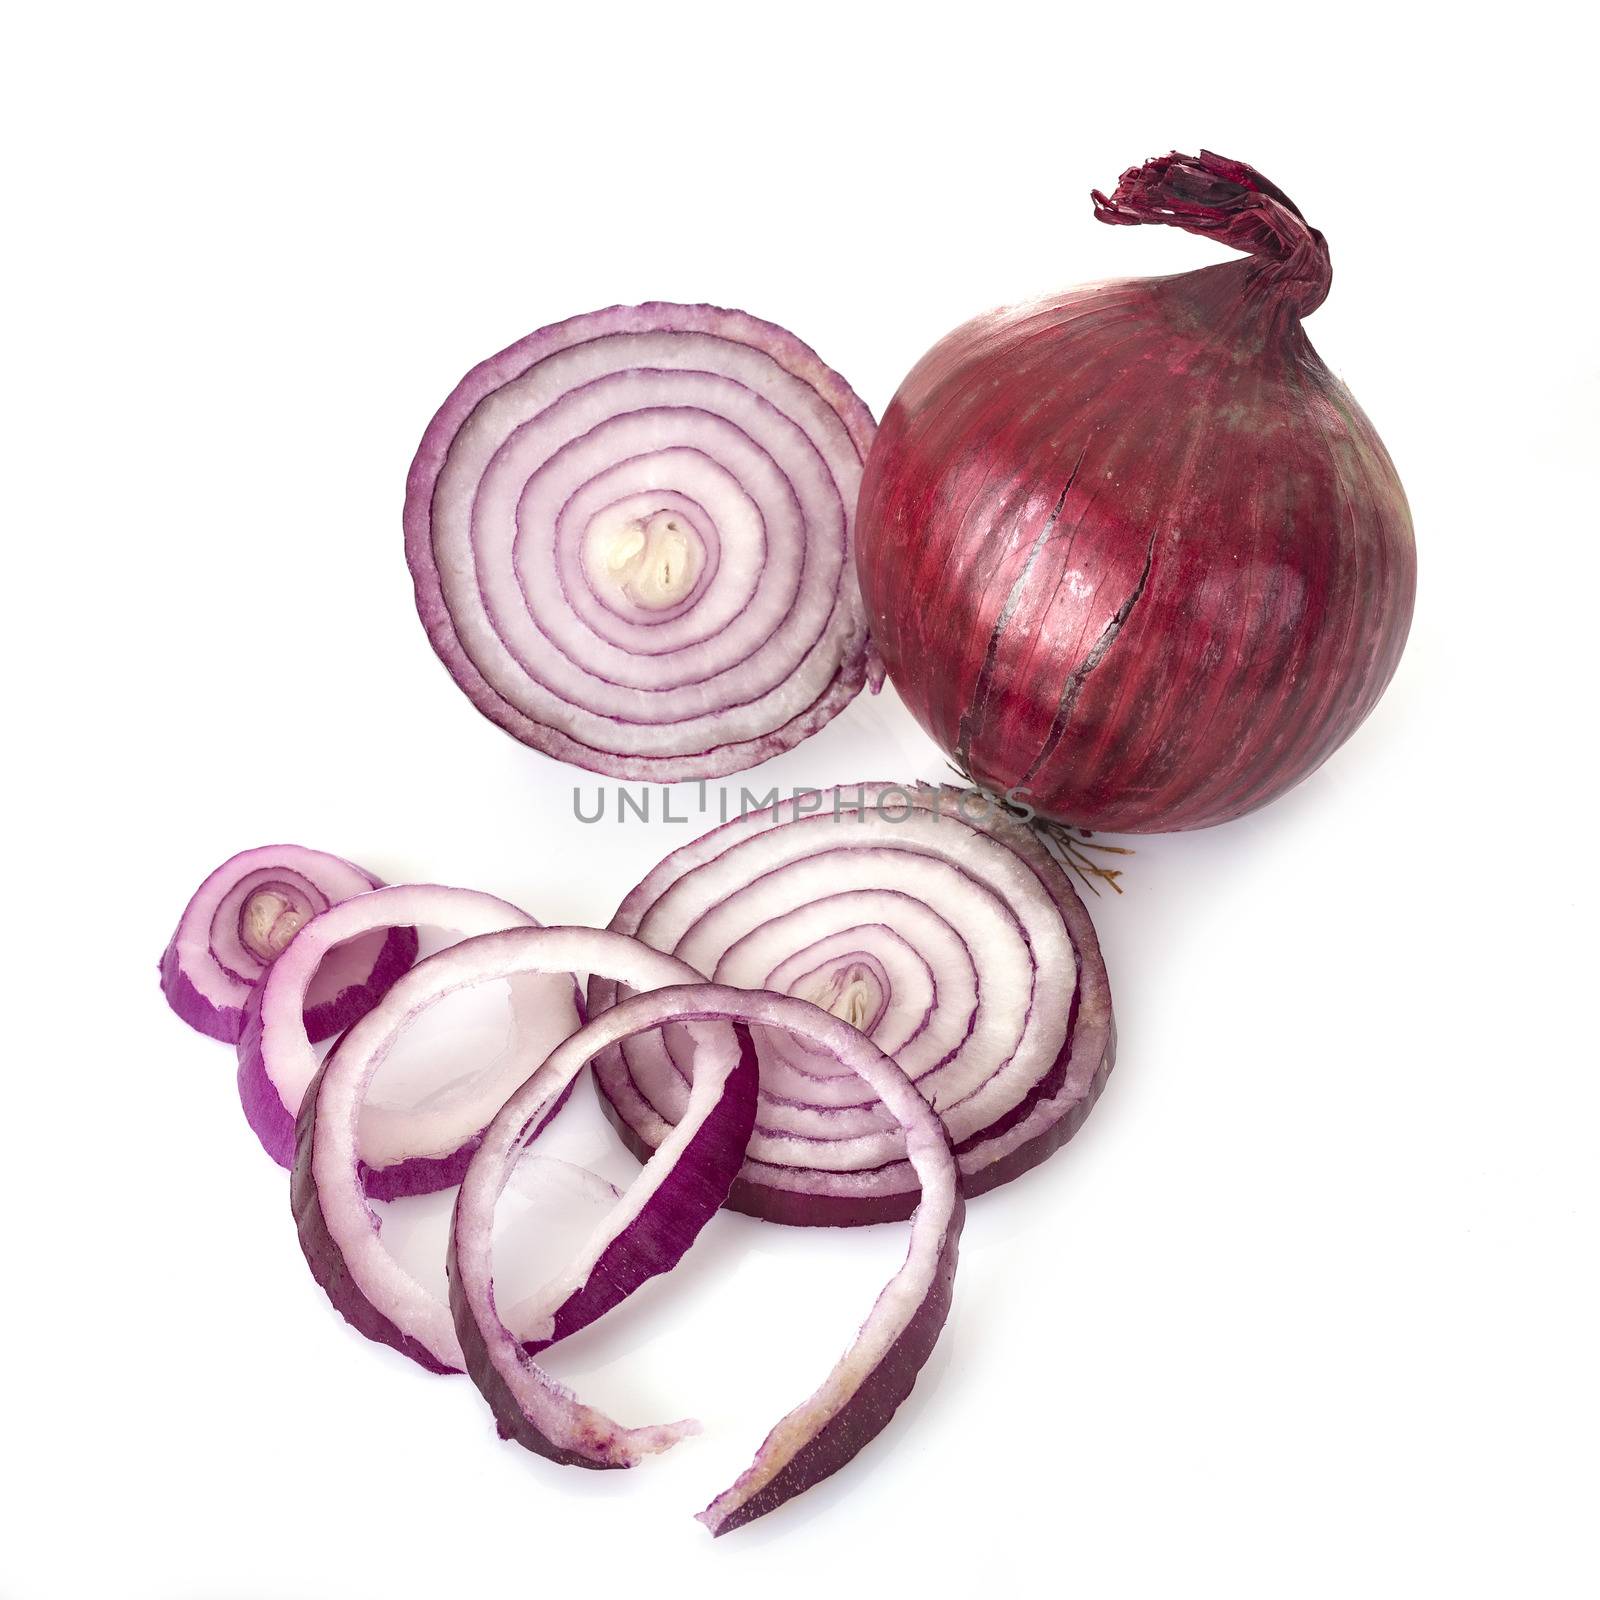 red onion in front of white background